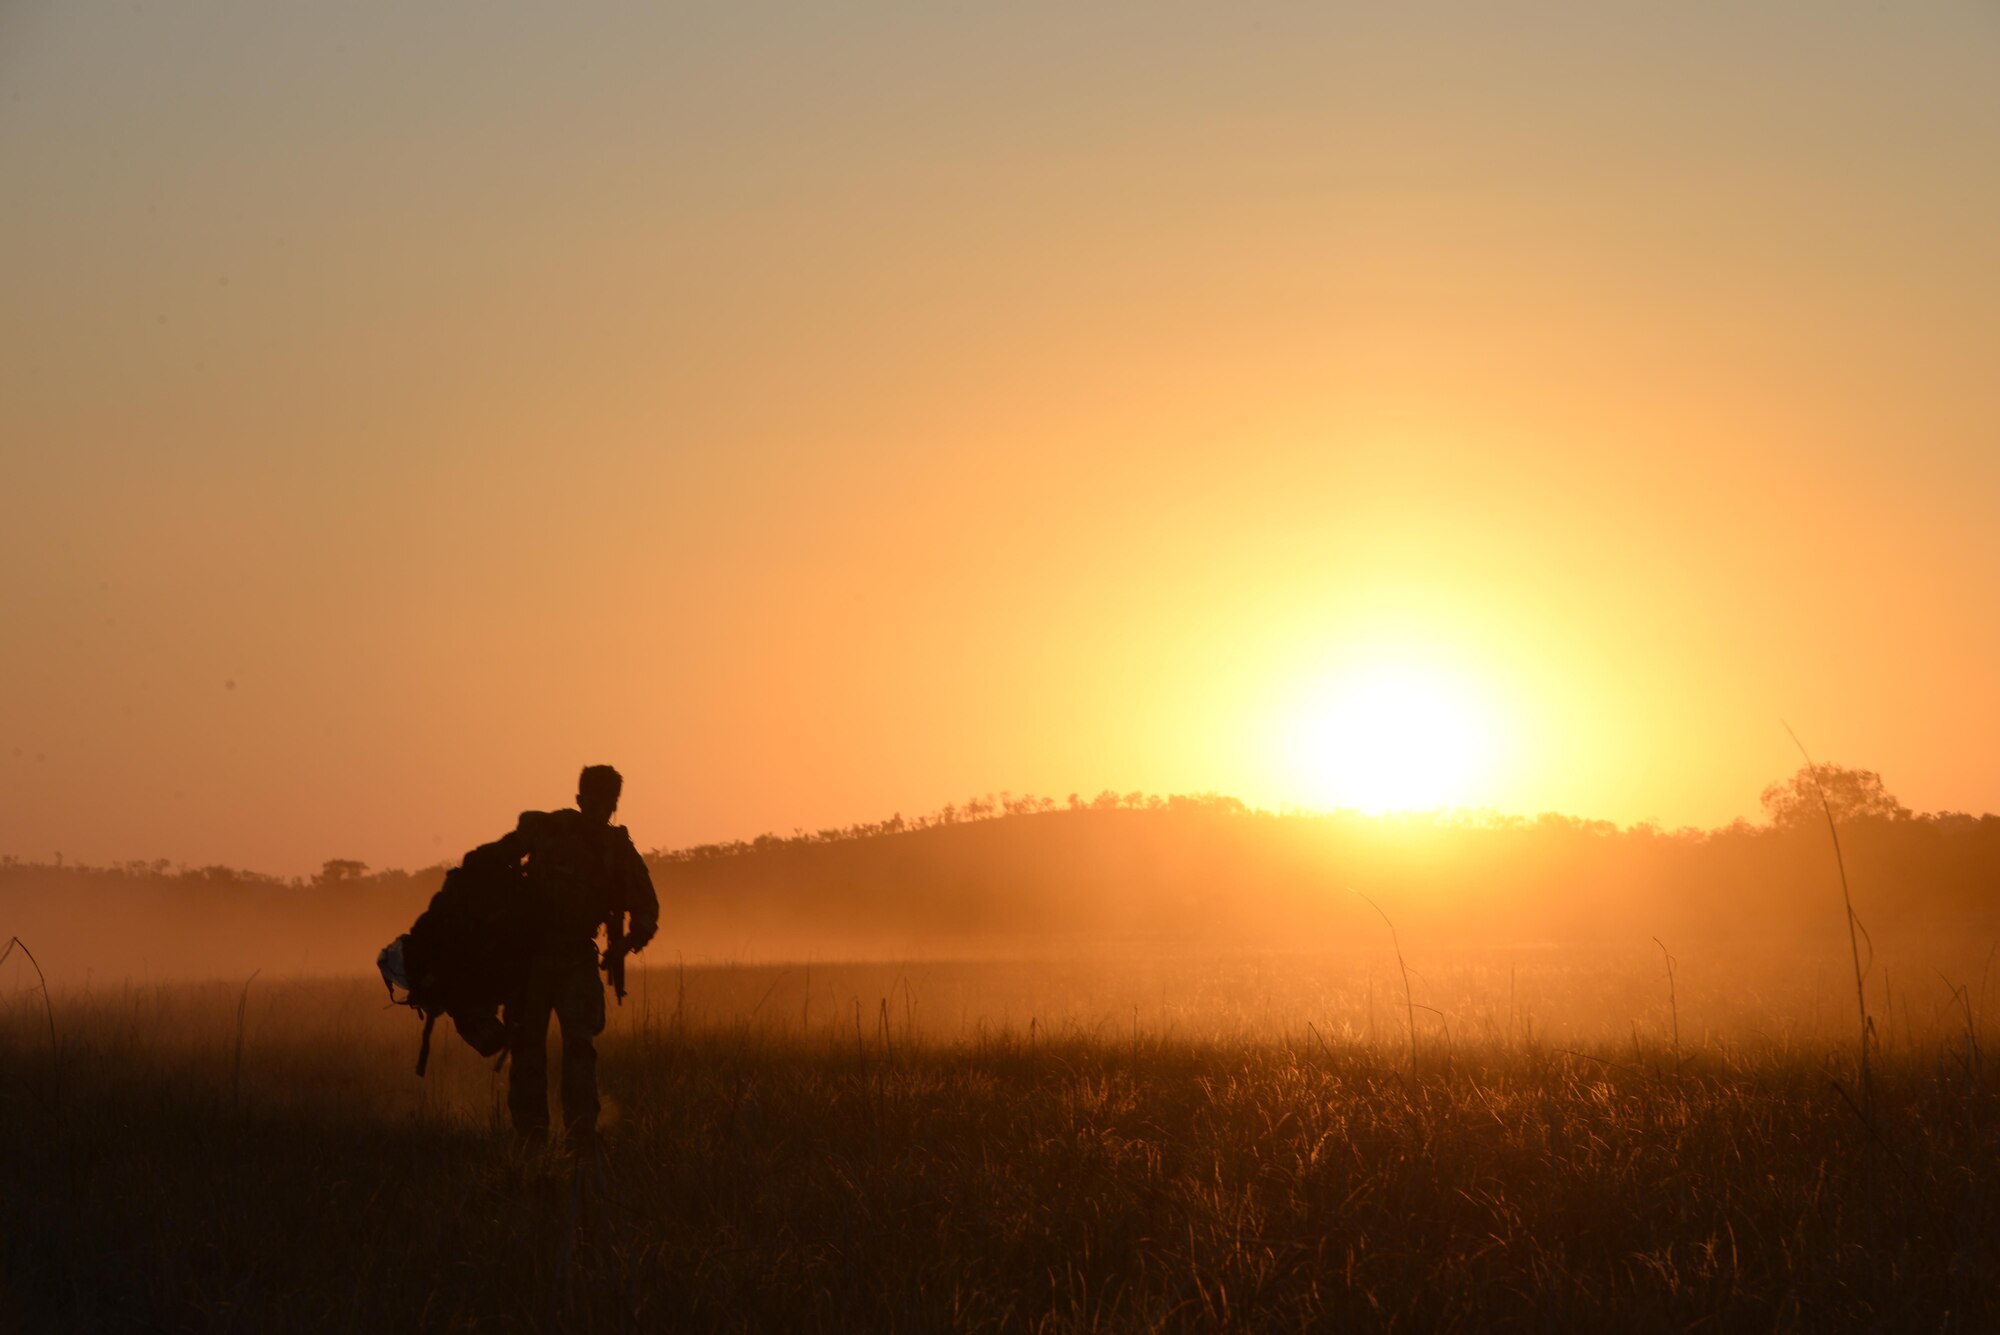 A special tactics special operation weatherman from the 320th Special Tactics Squadron carries his para chute and gear after performing a HALO jump during exercise Talisman Sabre in Northern Territory, Australia, July 10, 2015. Credible, ready maritime forces help to preserve peace and prevent conflict. Talisman Sabre participants have the opportunity to further enhance their ability to respond to crises as part of a joint or combined effort. (U.S. Air Force photo by Senior Airman Stephen G. Eigel)